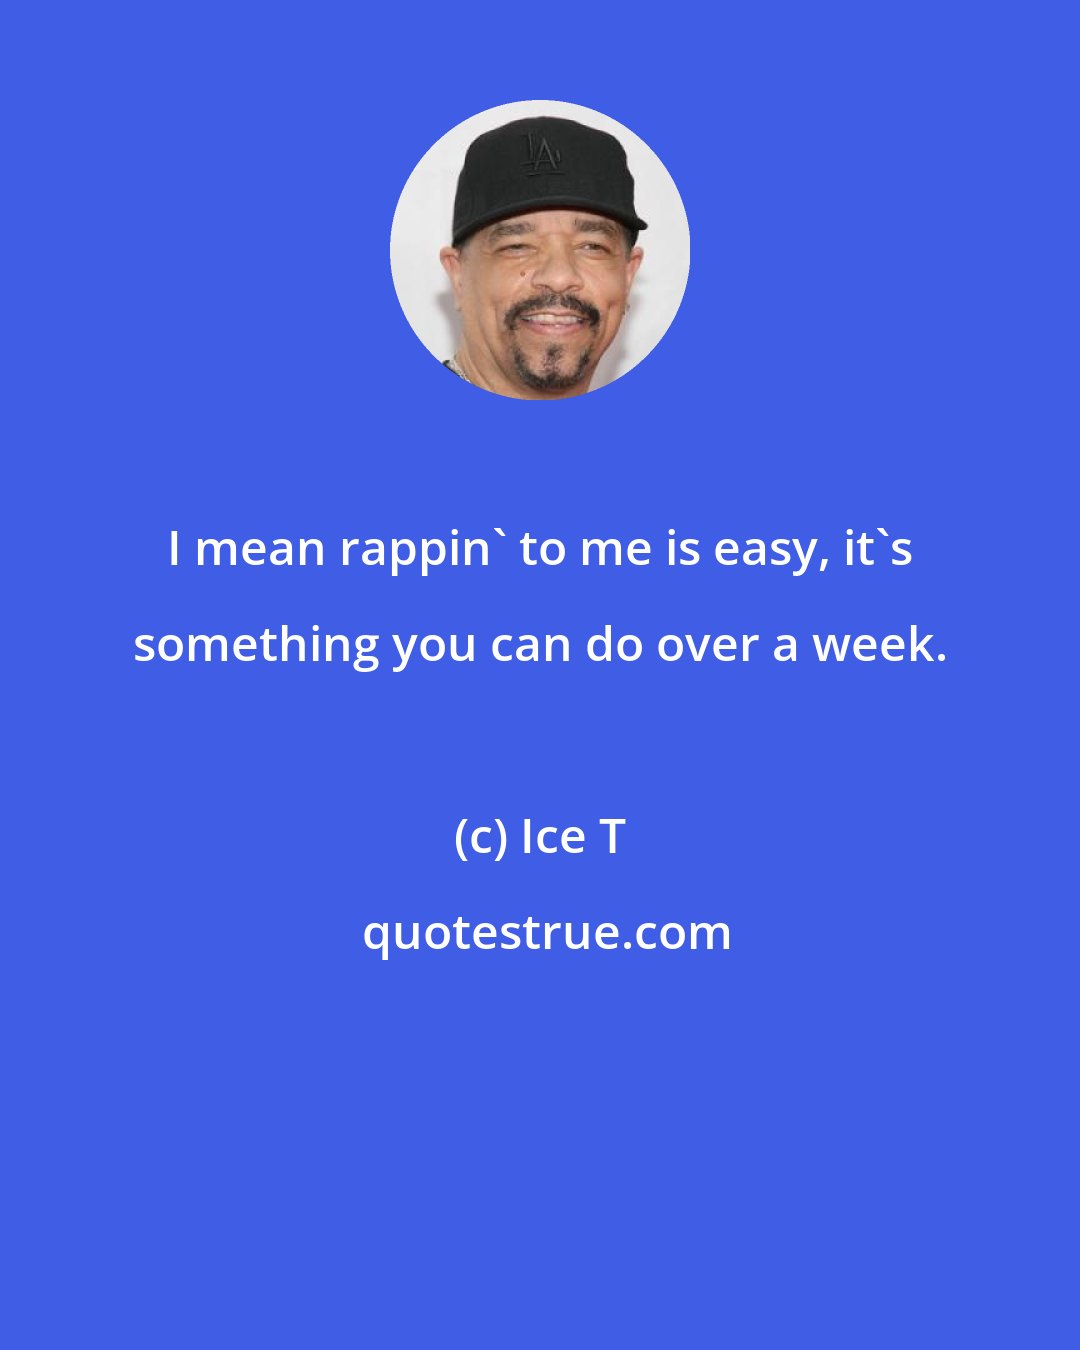 Ice T: I mean rappin' to me is easy, it's something you can do over a week.